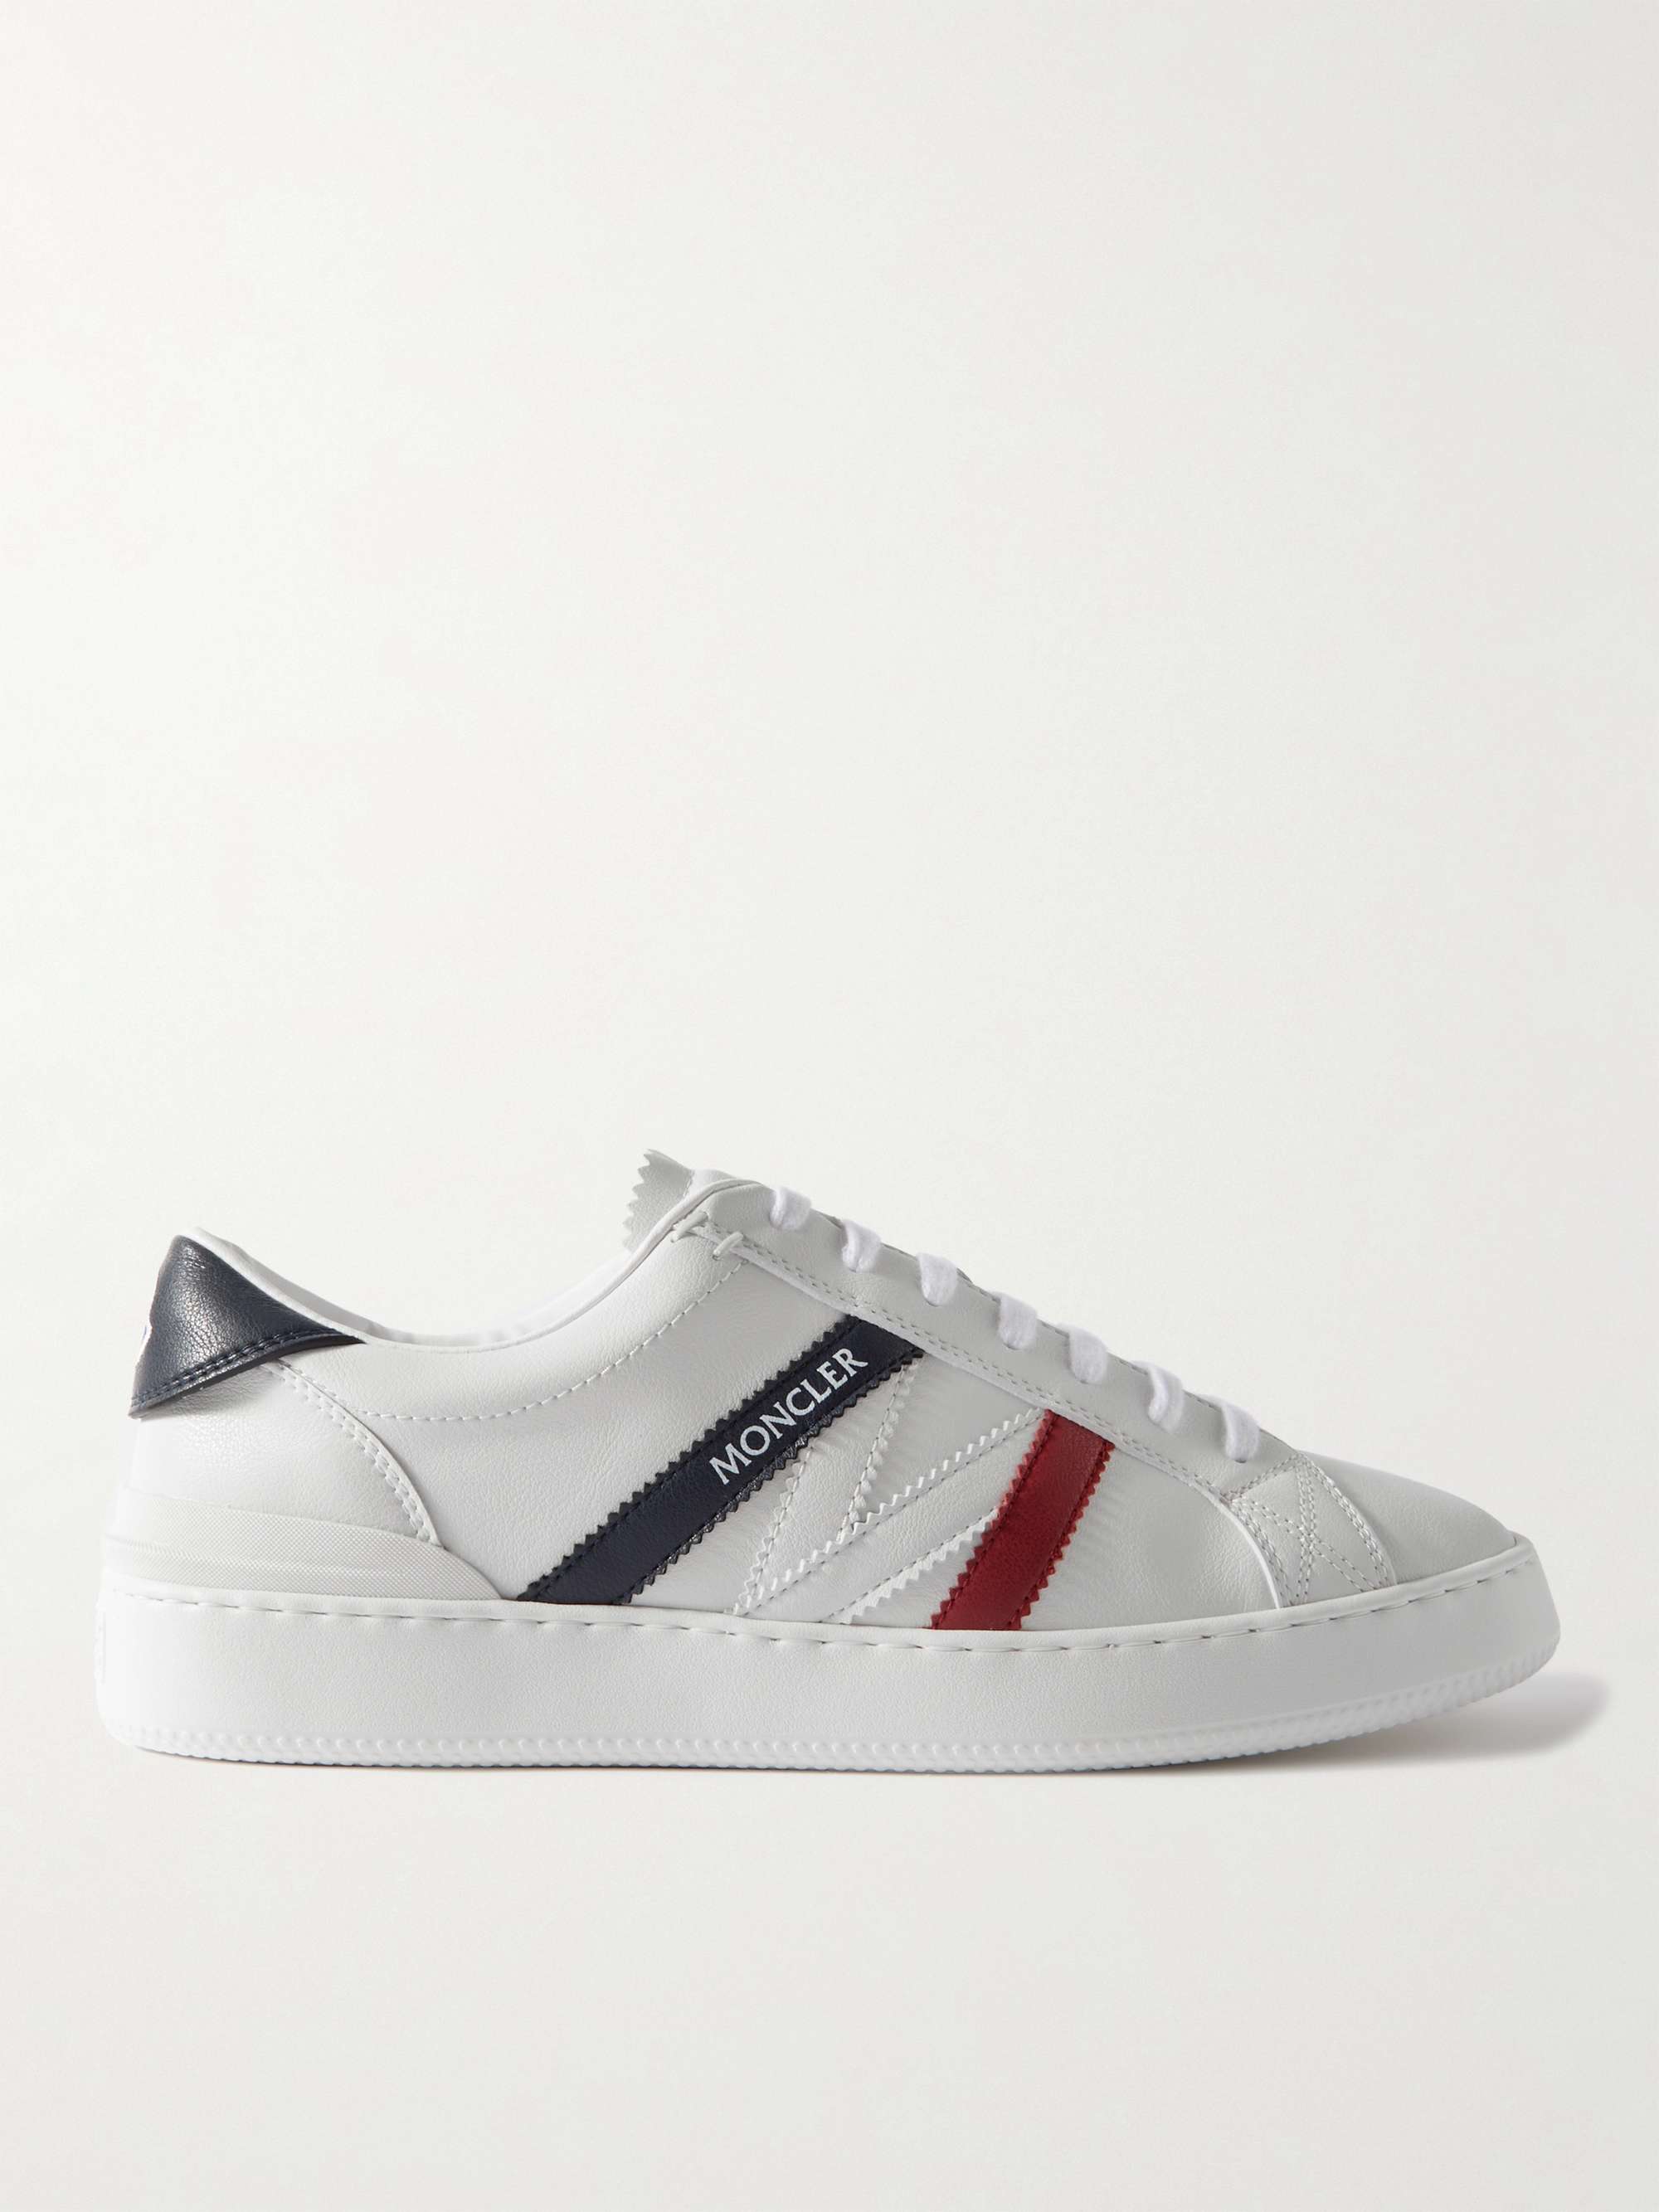 MONCLER Monaco M Striped Leather Sneakers